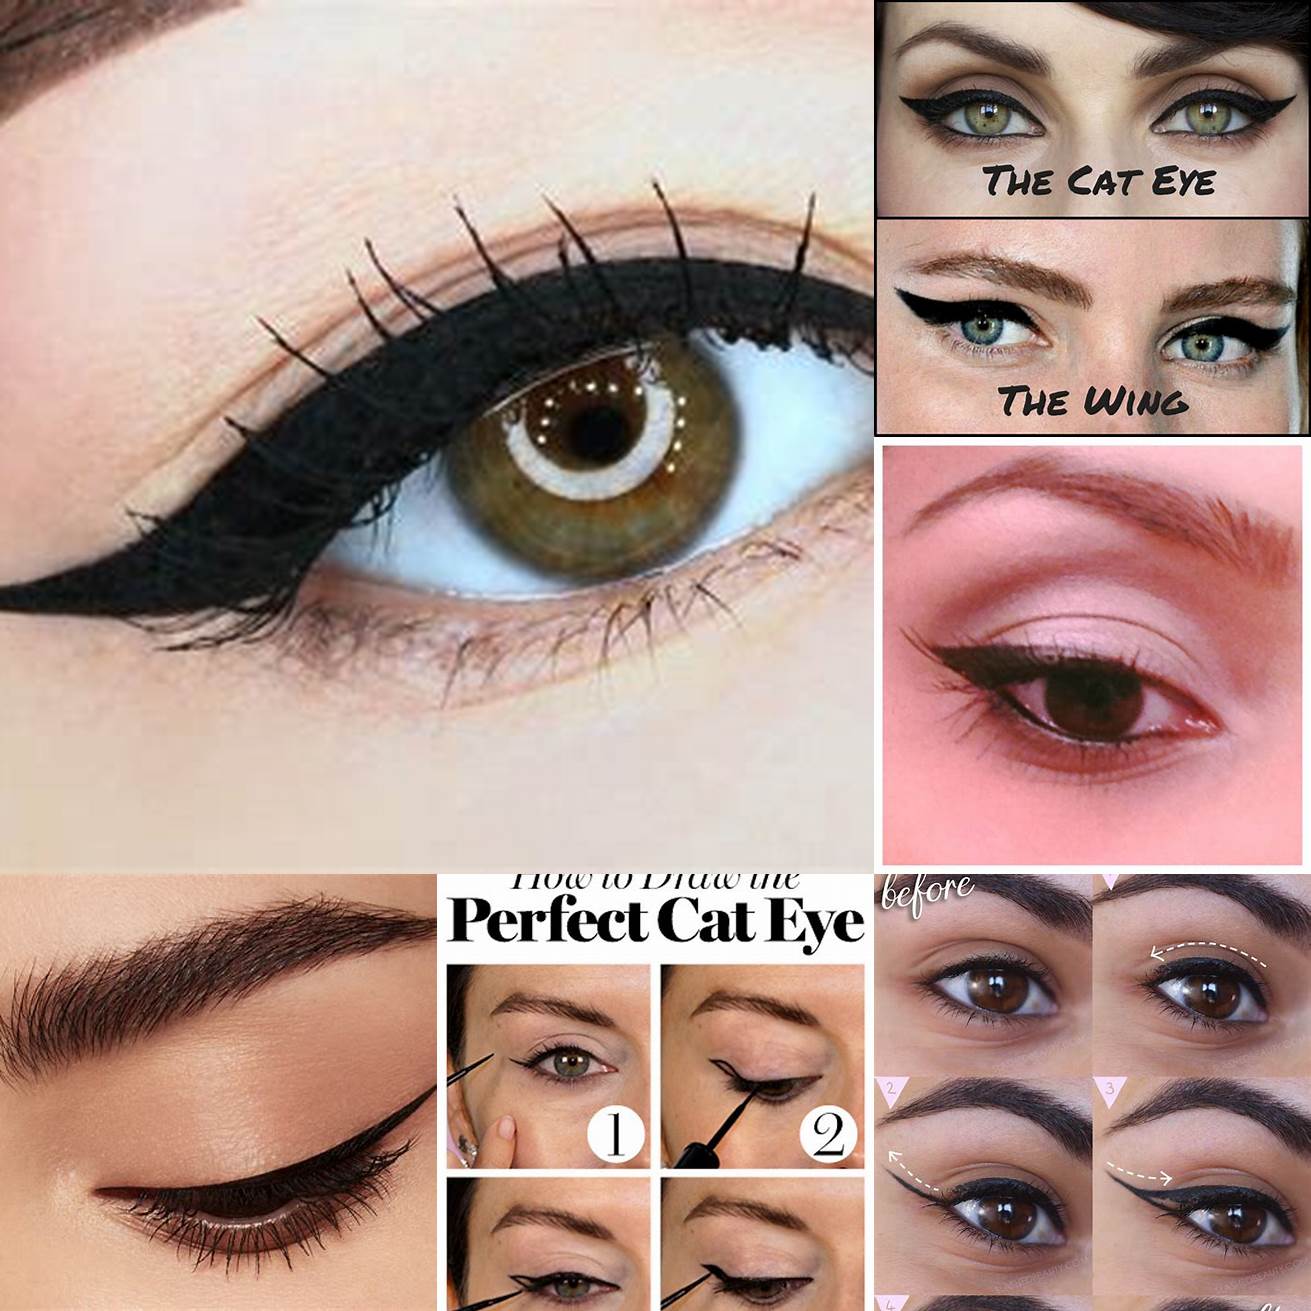 Connect the wing back to the rest of your eyeliner